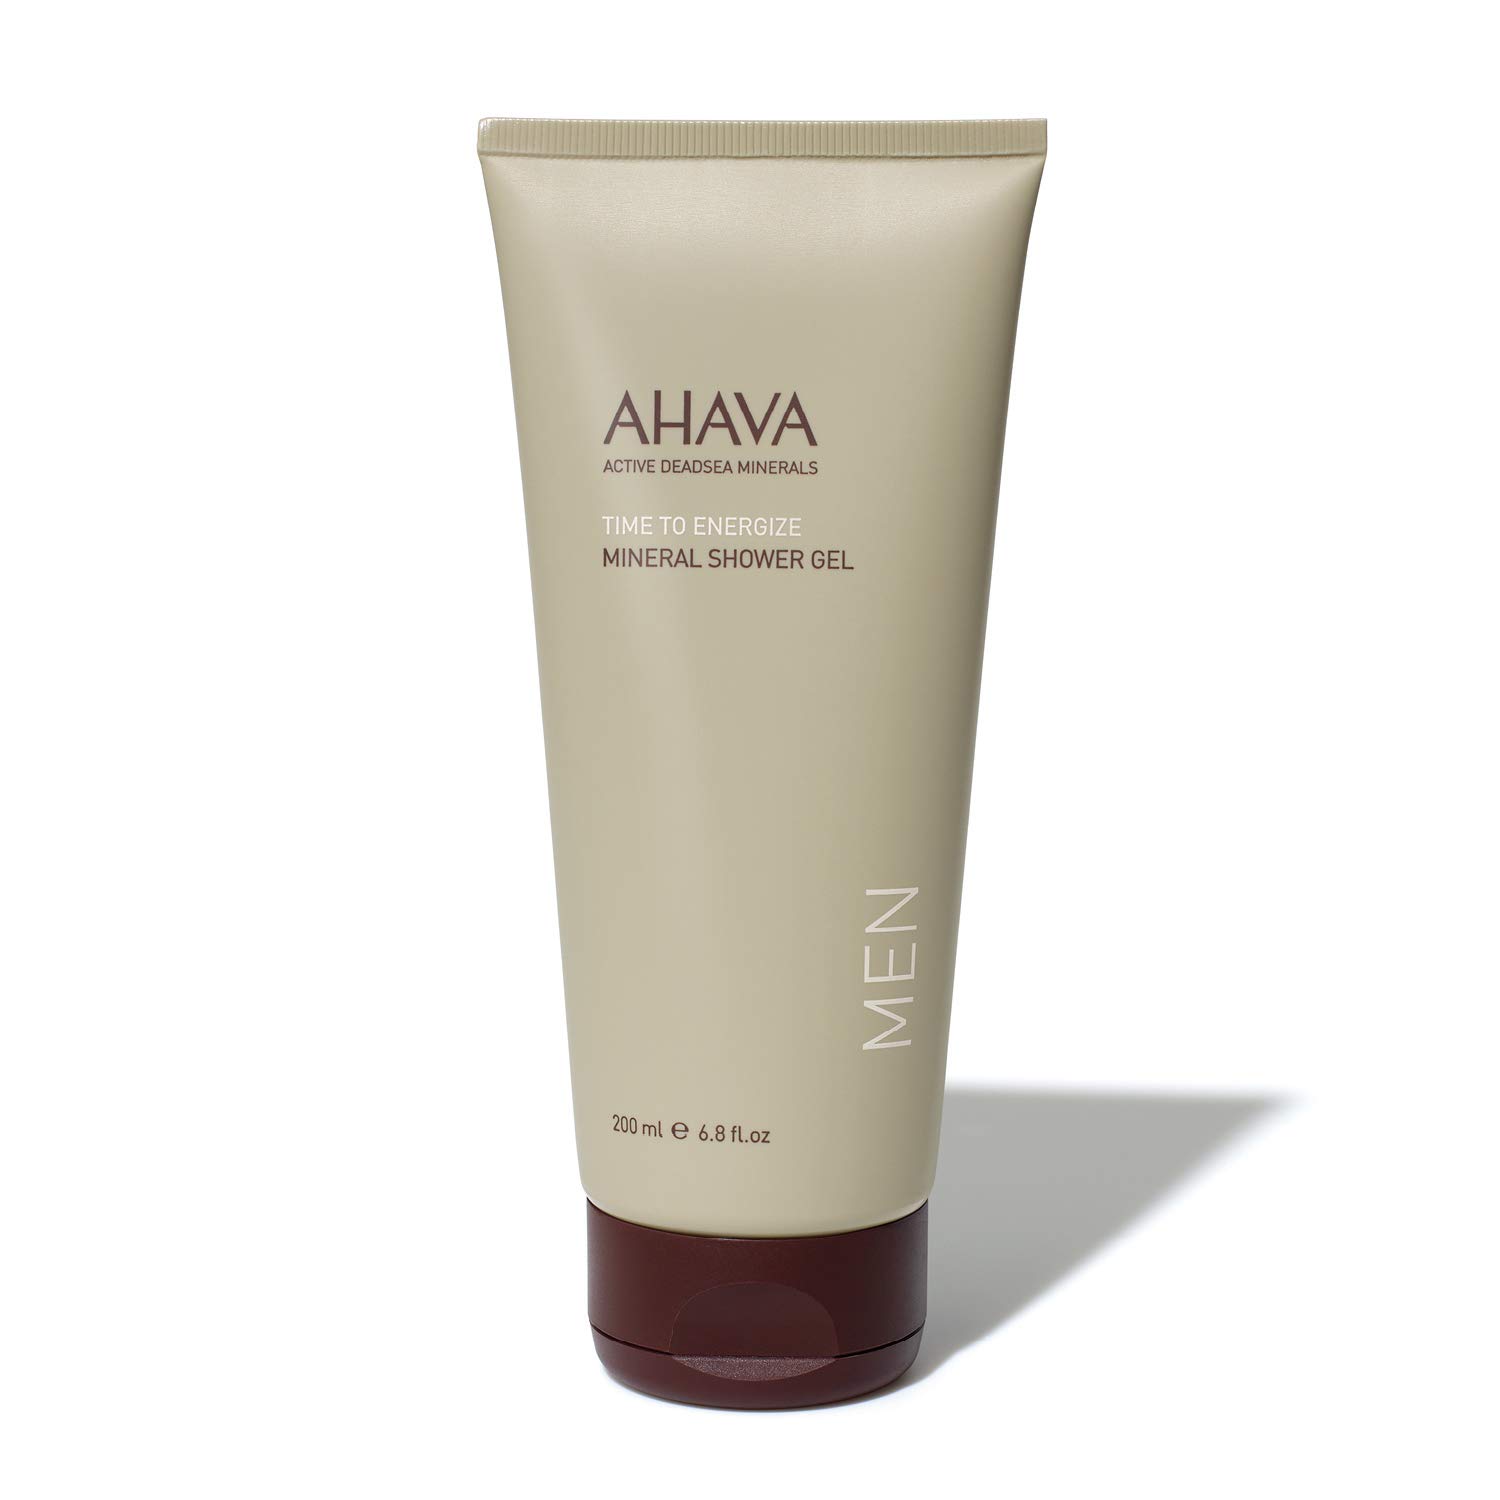 Ahava Active Dead Sea Minerals Time To Energize Mineral Shower Gel 200ml